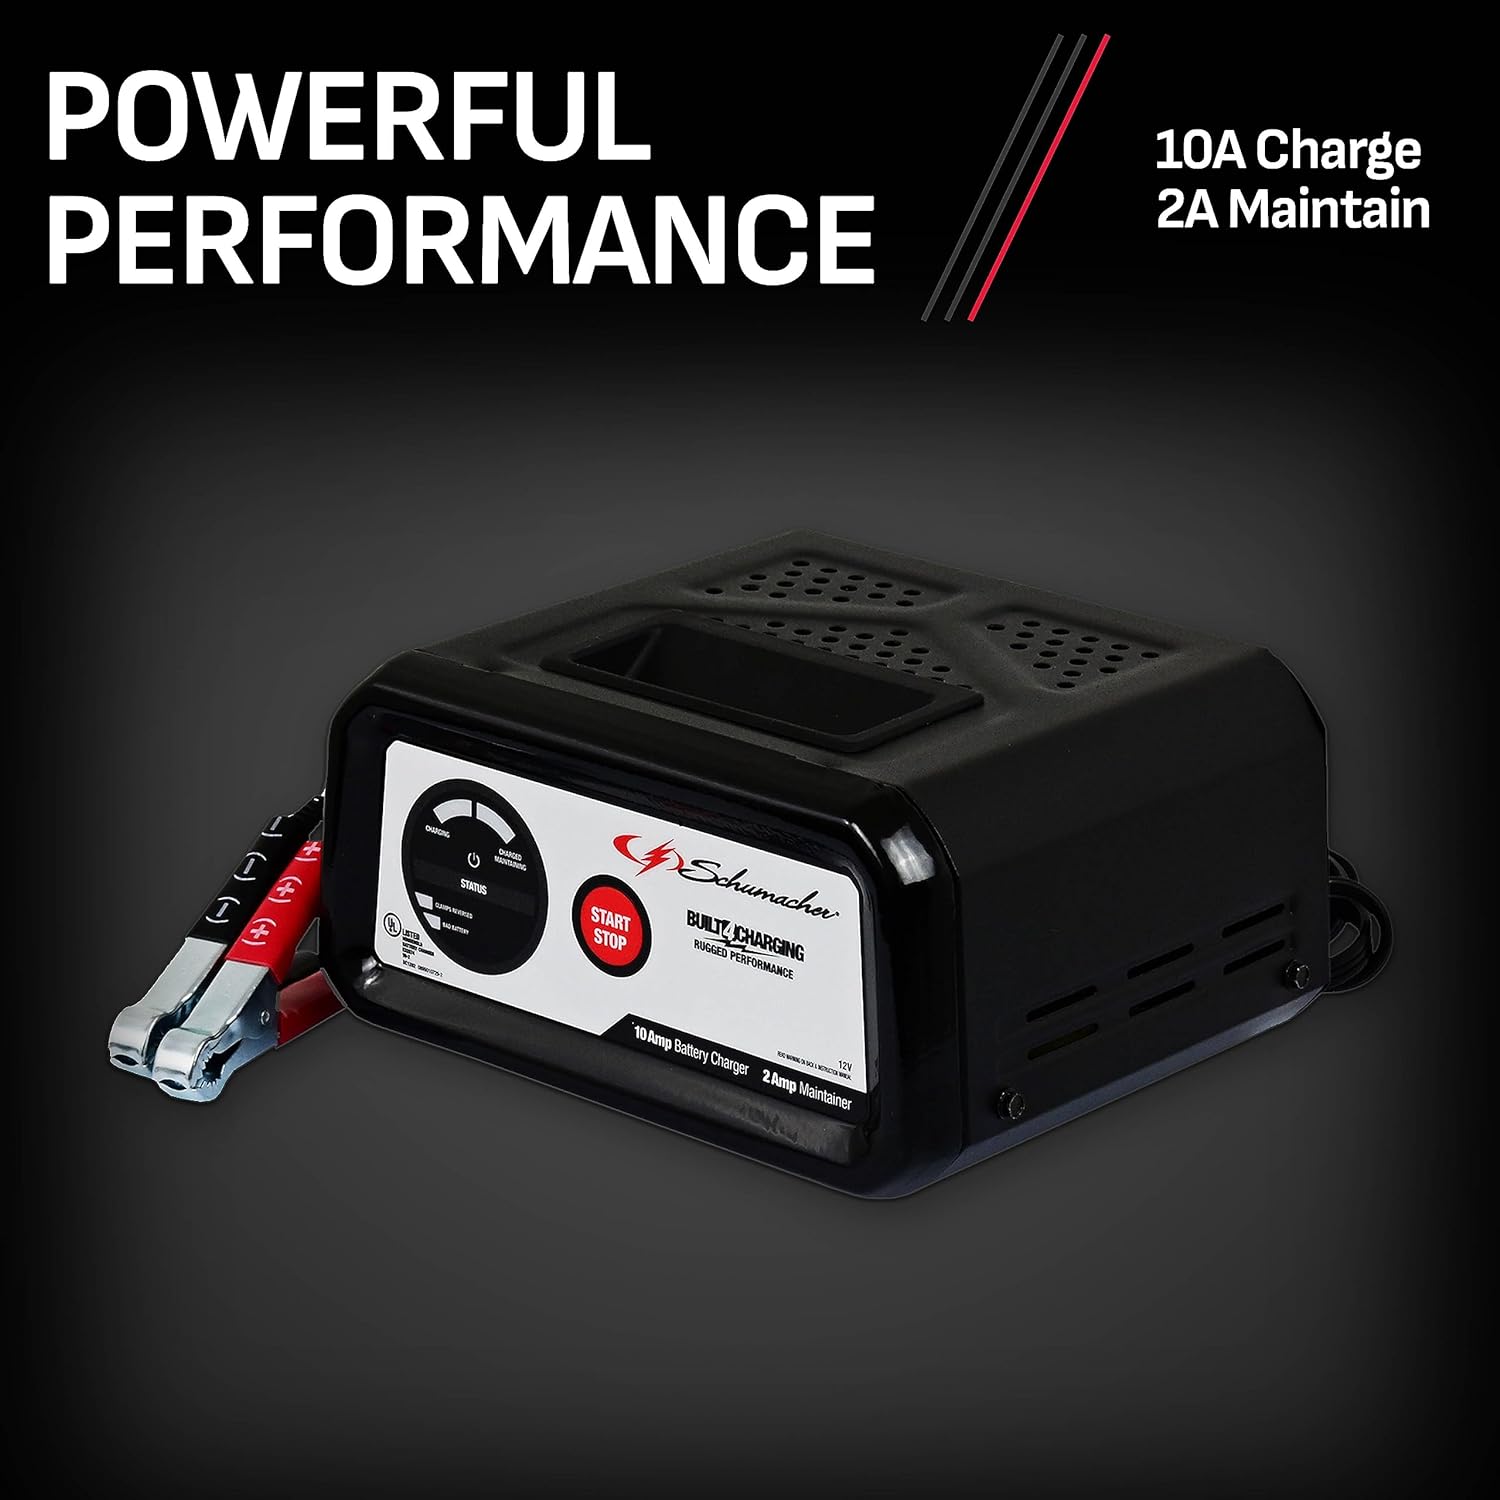 Schumacher SC1282 Fully Automatic Battery Charger and Maintainer - 10 Amp/2 Amp 12V - For Automotive, Marine, and Power Sport Batteries, Black - Schumacher SC1282 Battery Charger Review